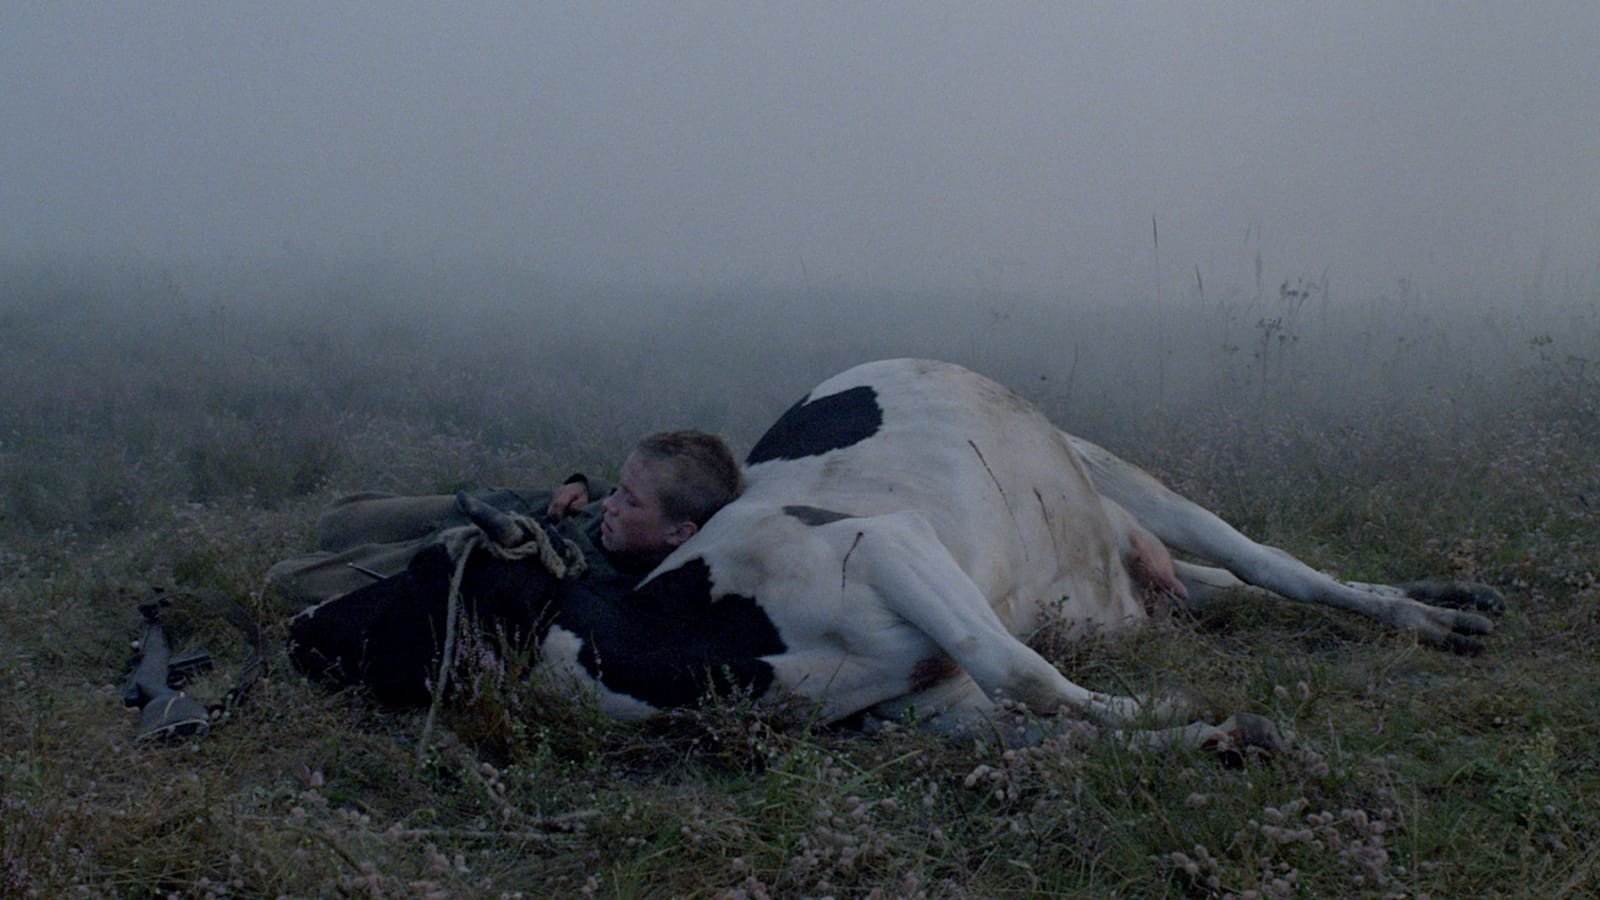 Image from the 1985 film Come and See in which the main character Flyora is asleep on a dead cow in a field.